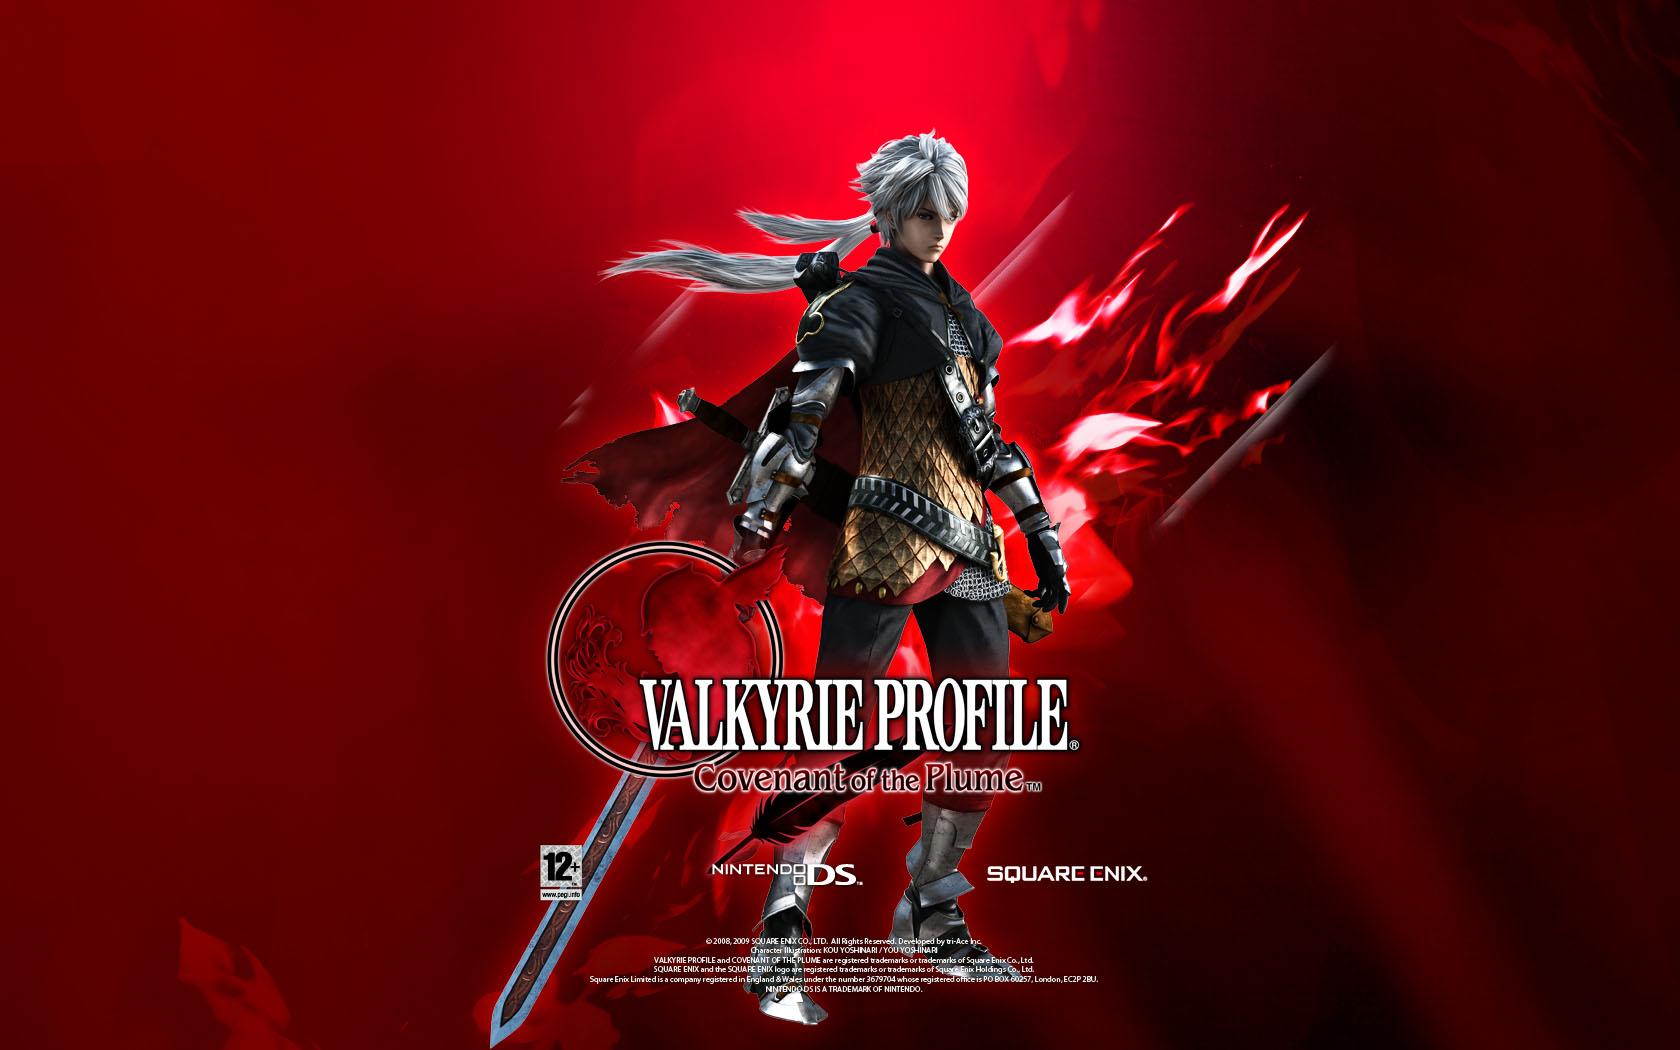 Image Valkyrie Profile Covenant Of The Plume Wallpaper